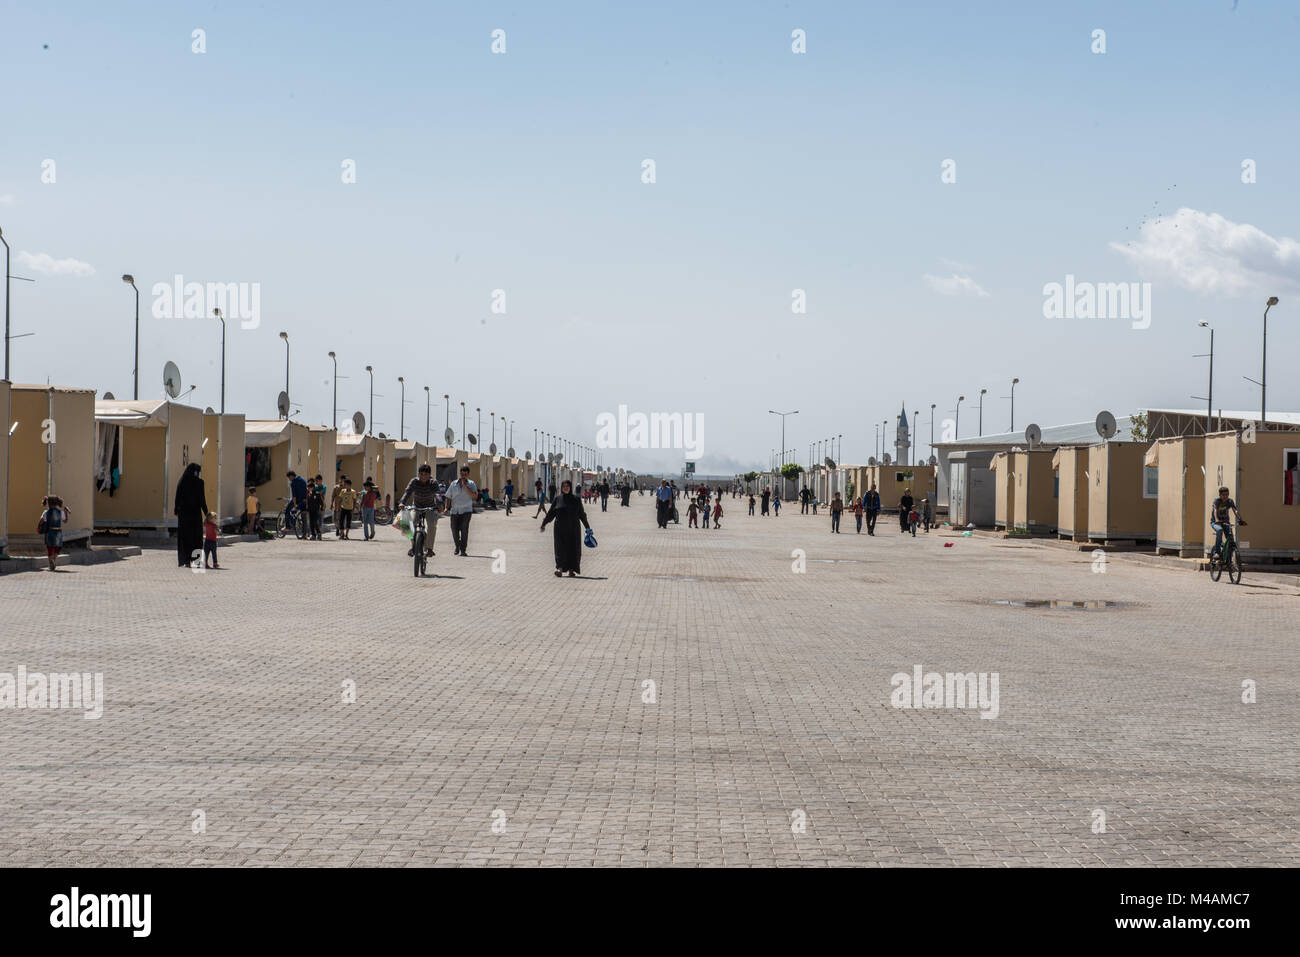 A group of refugees is walking along the main street of the Kilis refugee camp in Turkey, near the border with Syria. Stock Photo